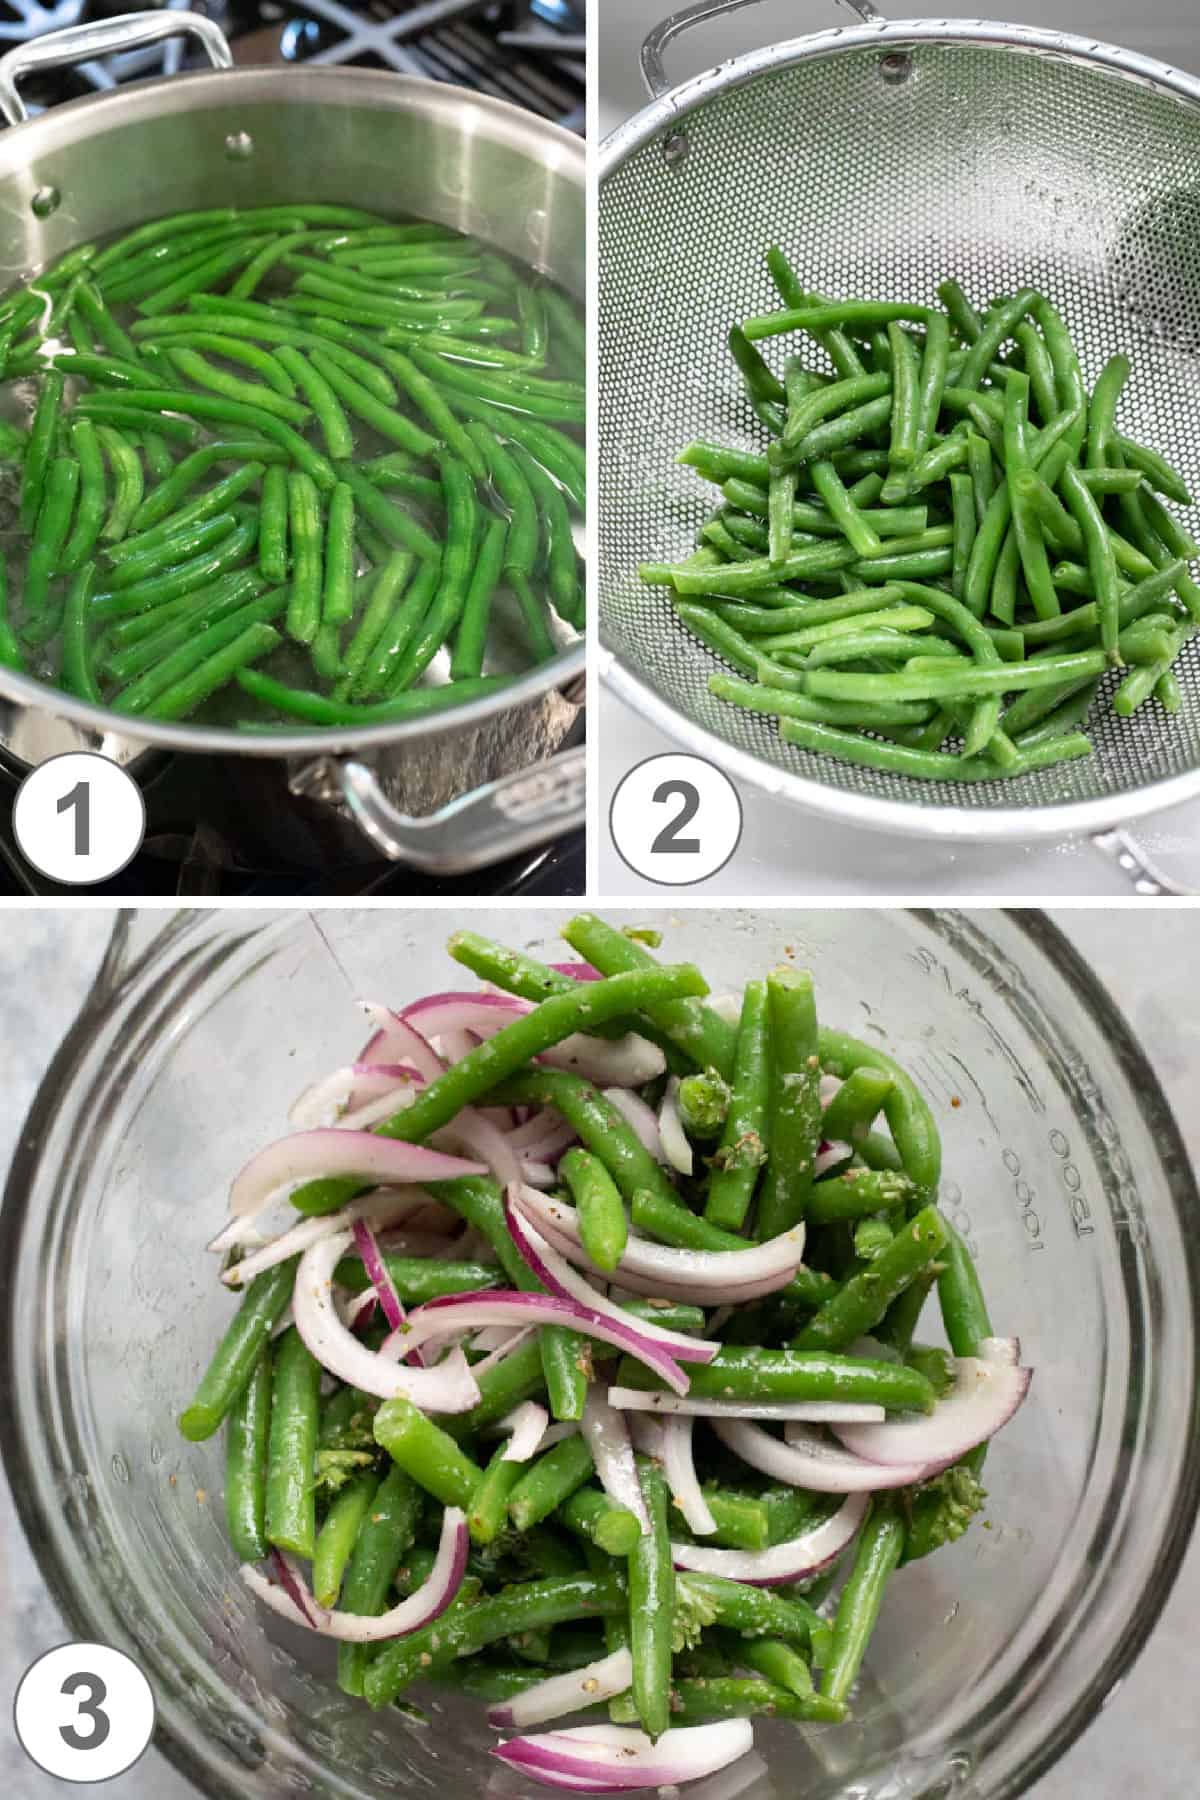 A 3-photo collage showing cooking and draining green beans, then tossing with other ingredients.